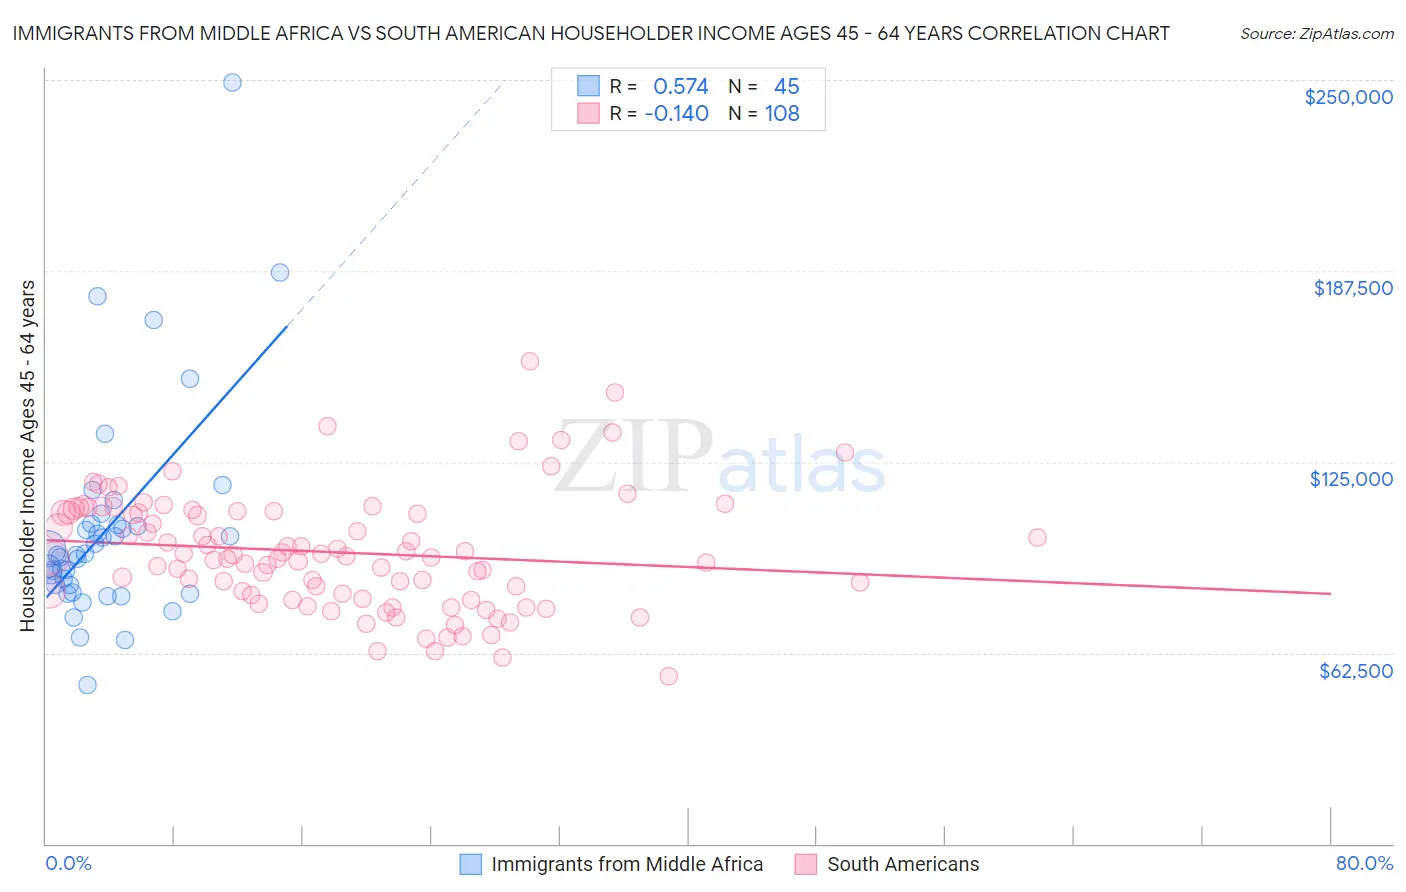 Immigrants from Middle Africa vs South American Householder Income Ages 45 - 64 years